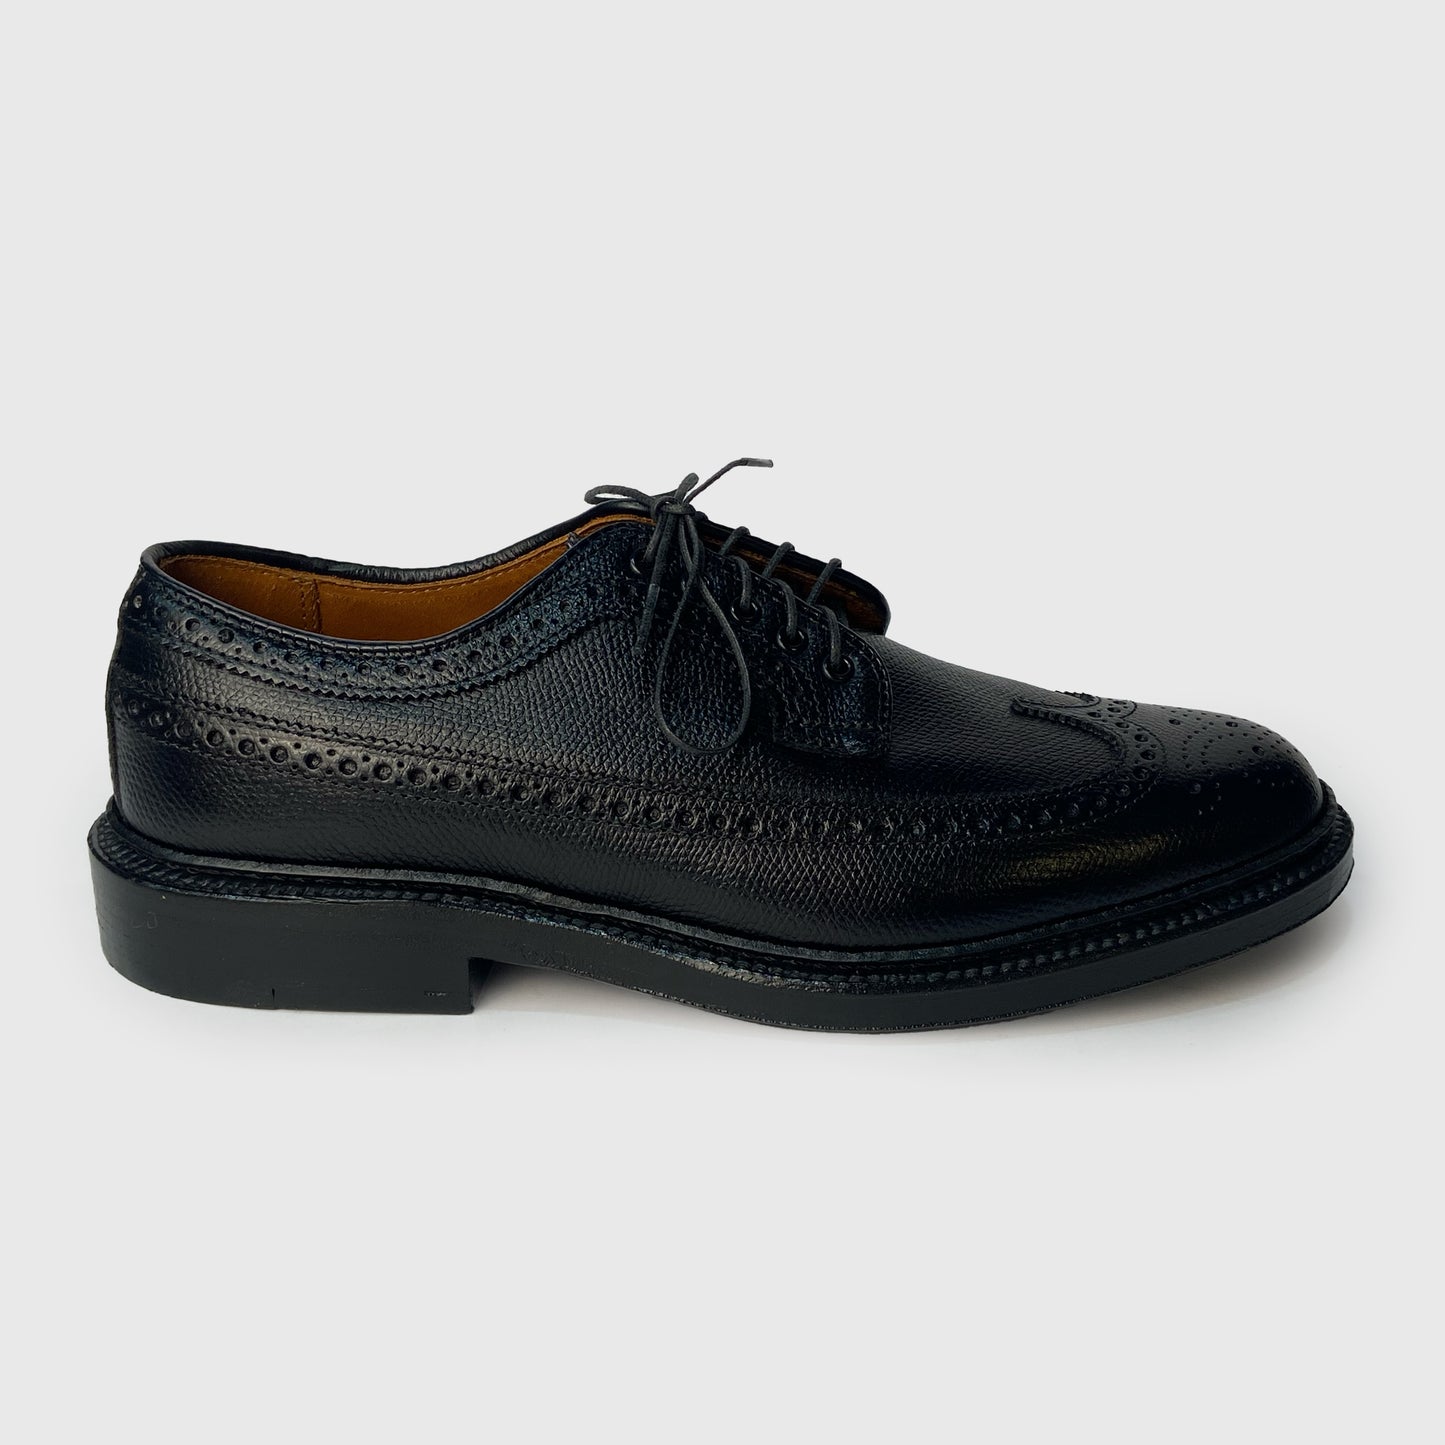 Alden x Silver Deer Long Wing in Black Pebble Grain with Double Leather Sole 97690